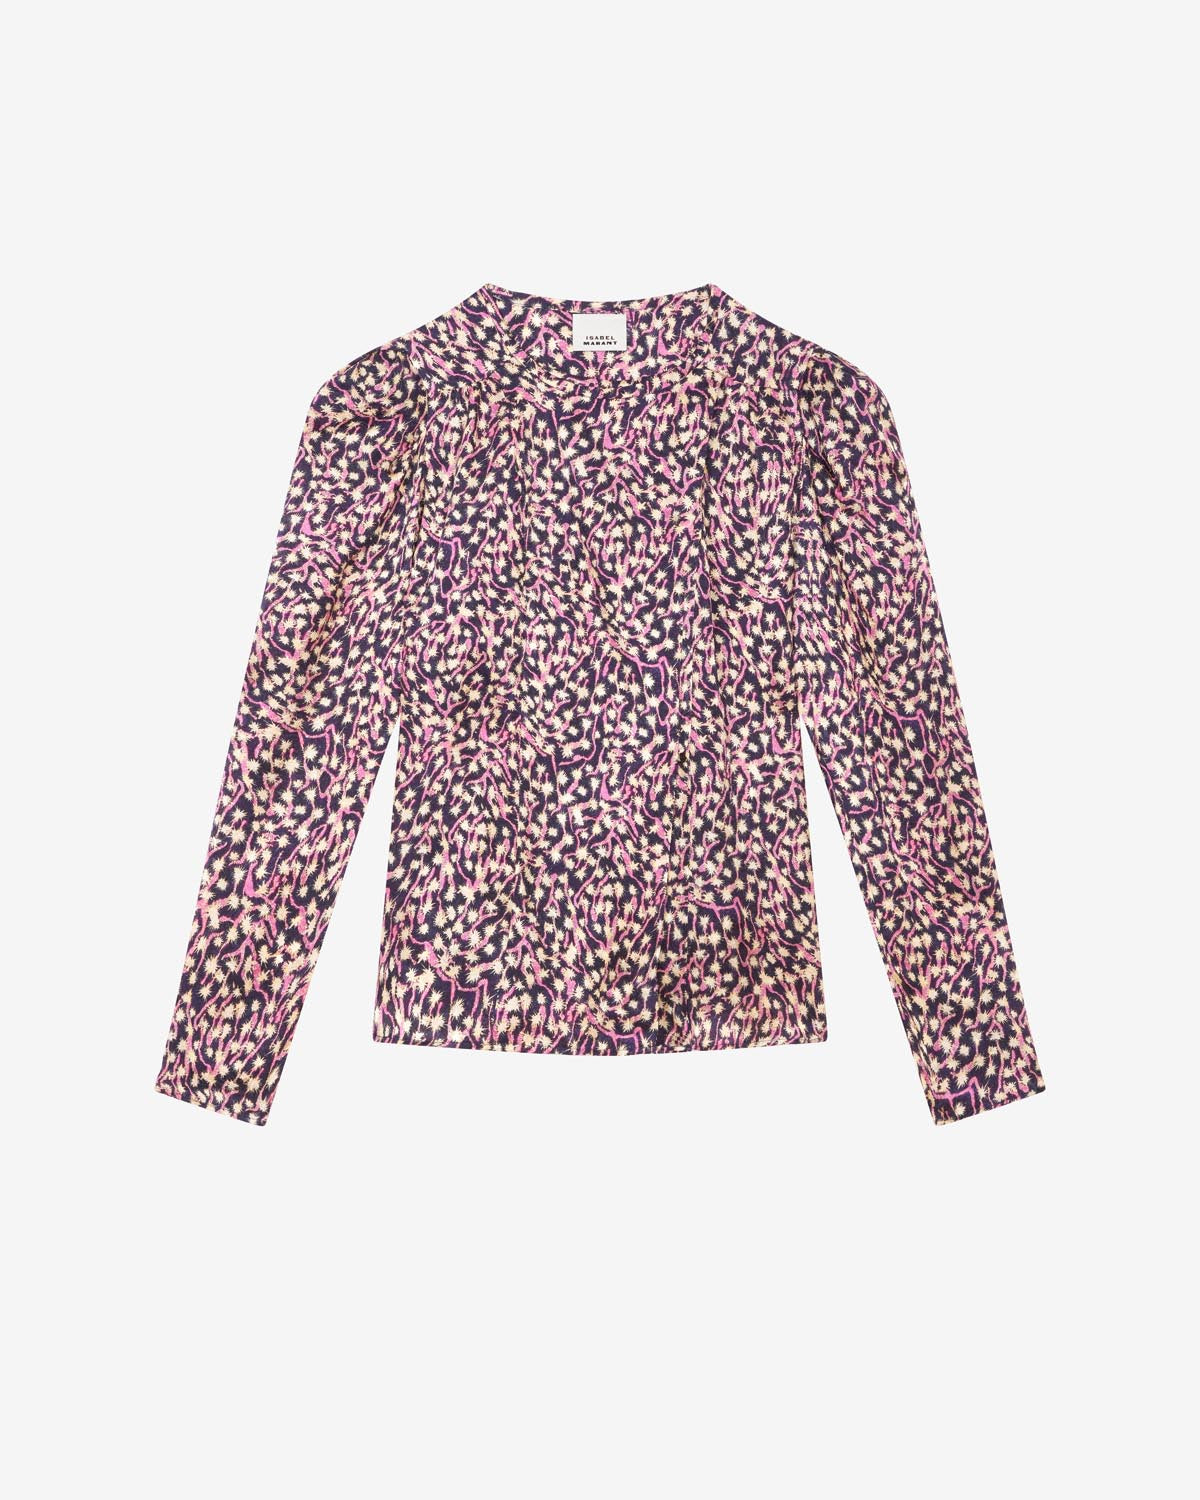 Tops and Shirts Woman | ISABEL MARANT Official Online Store